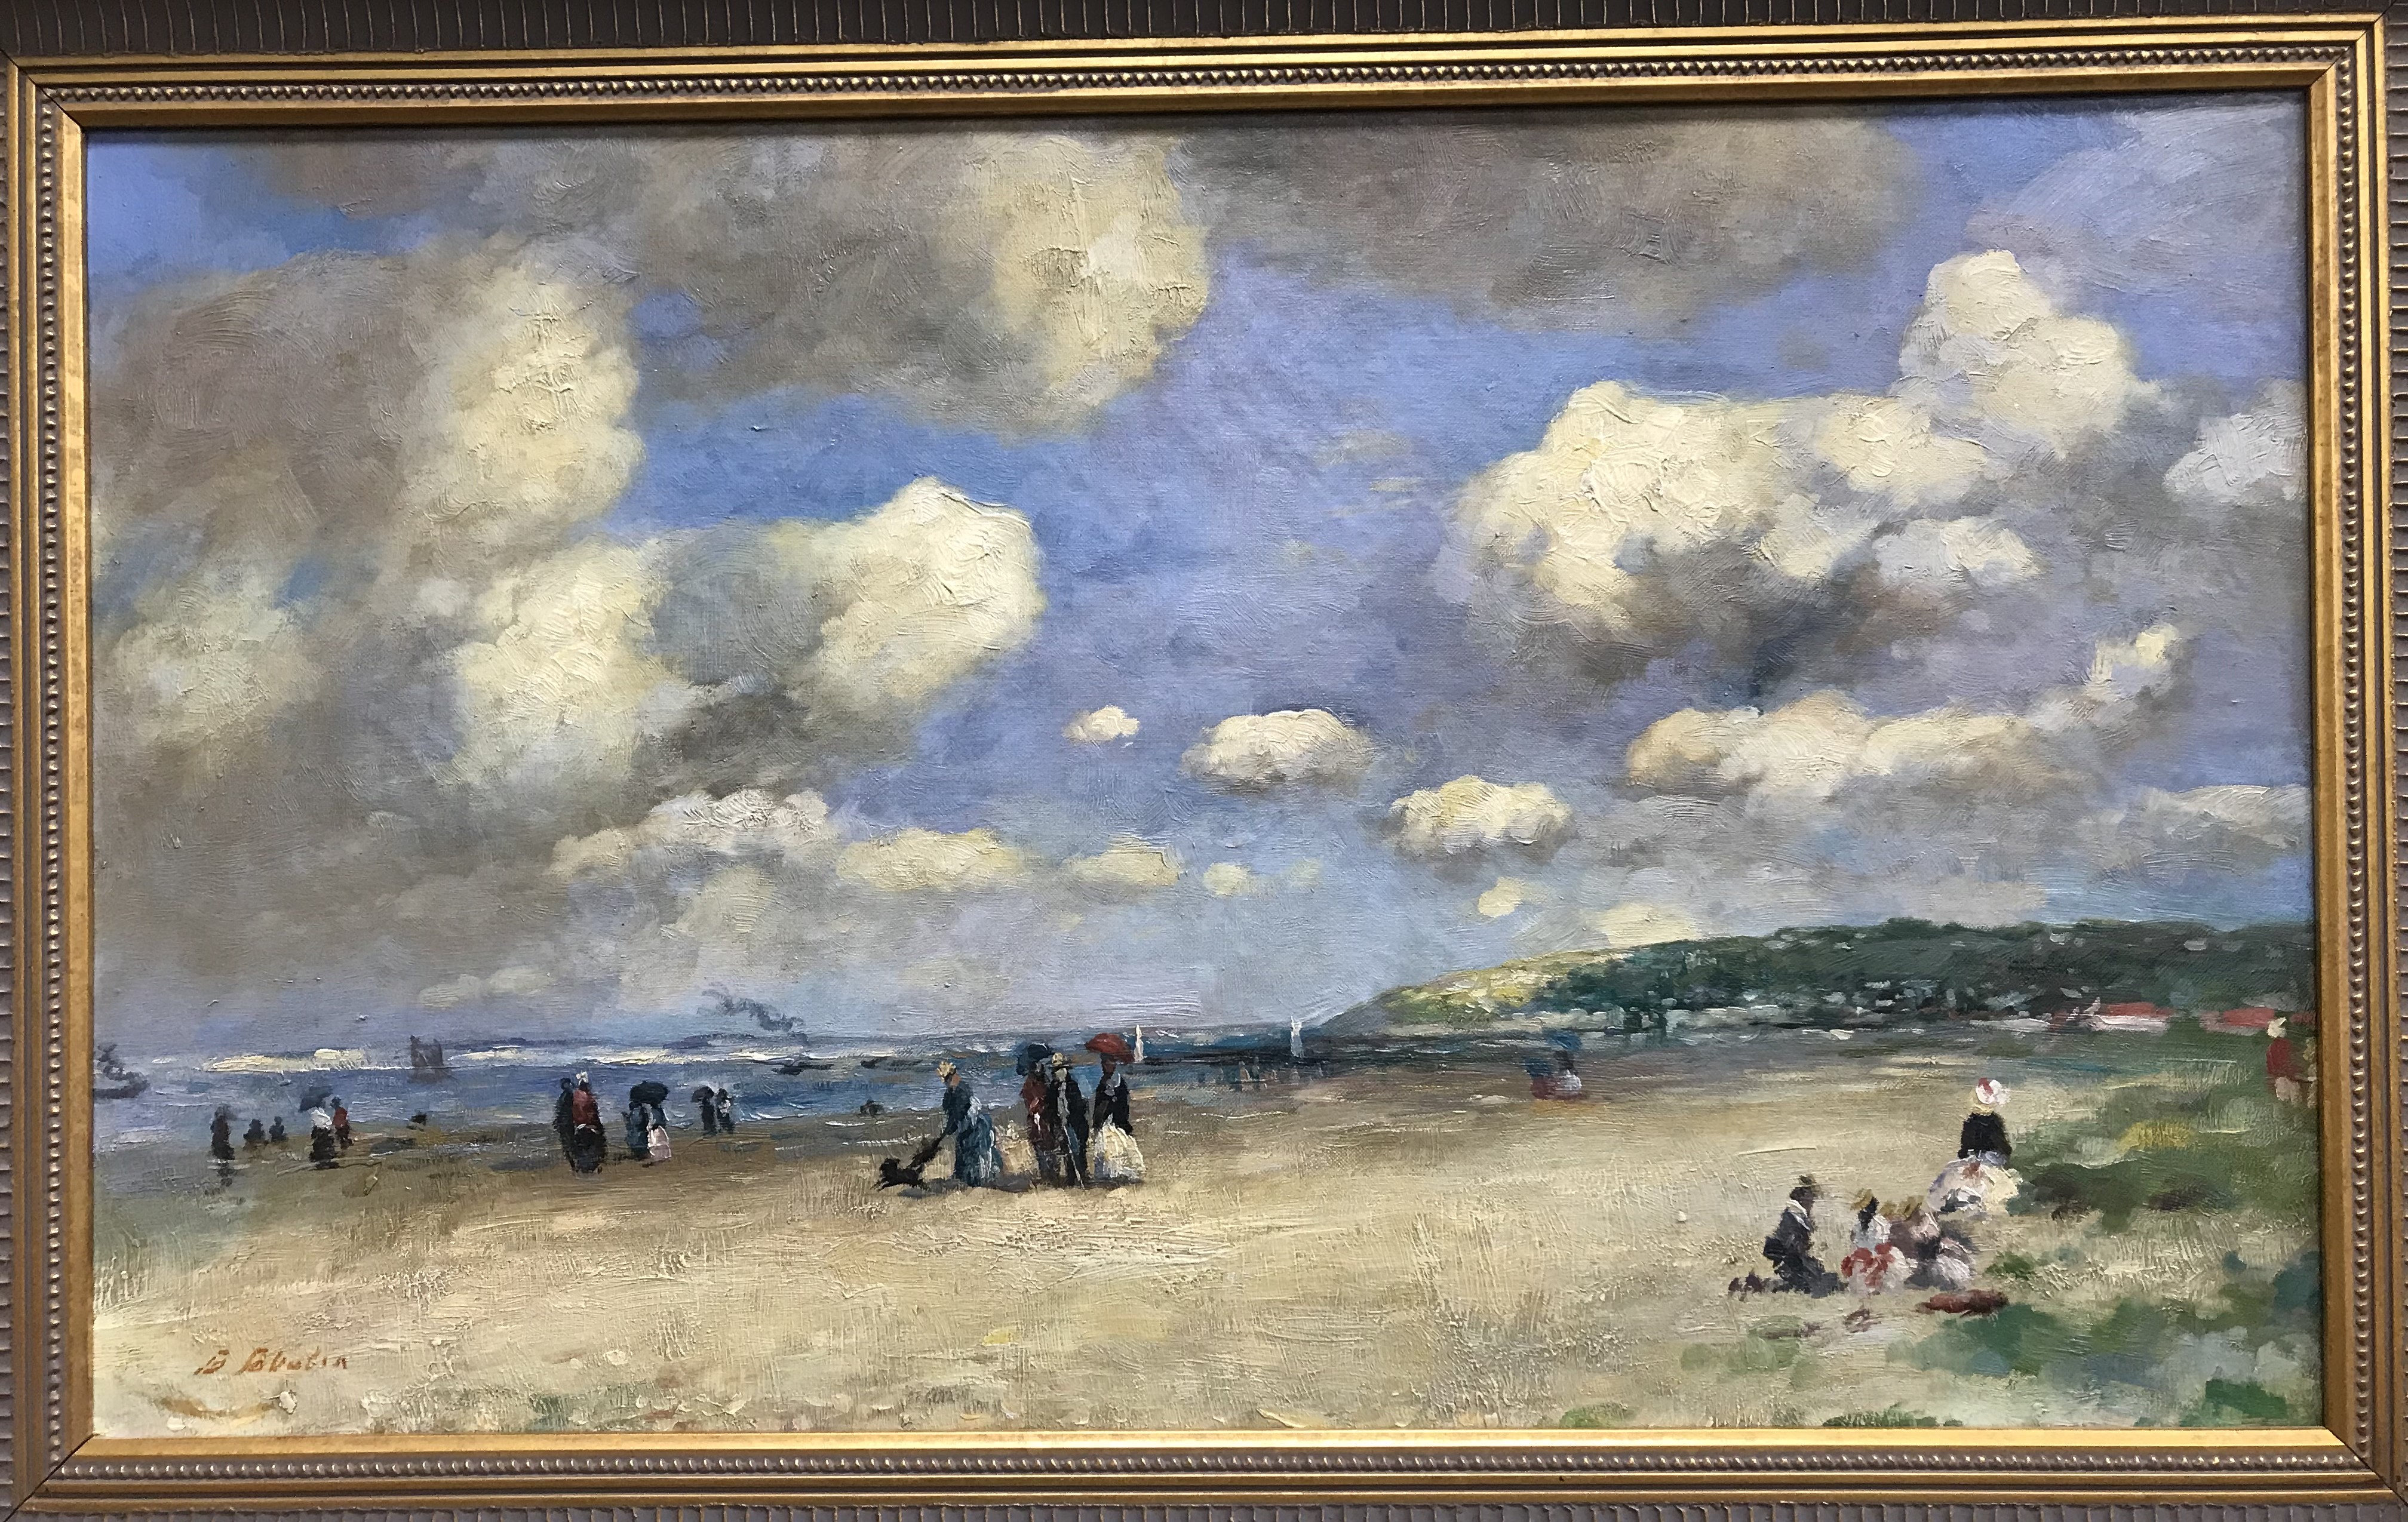 ATTRIBUTED TO EUGENE BOUDIN "Beach scene with figures", oil on canvas,